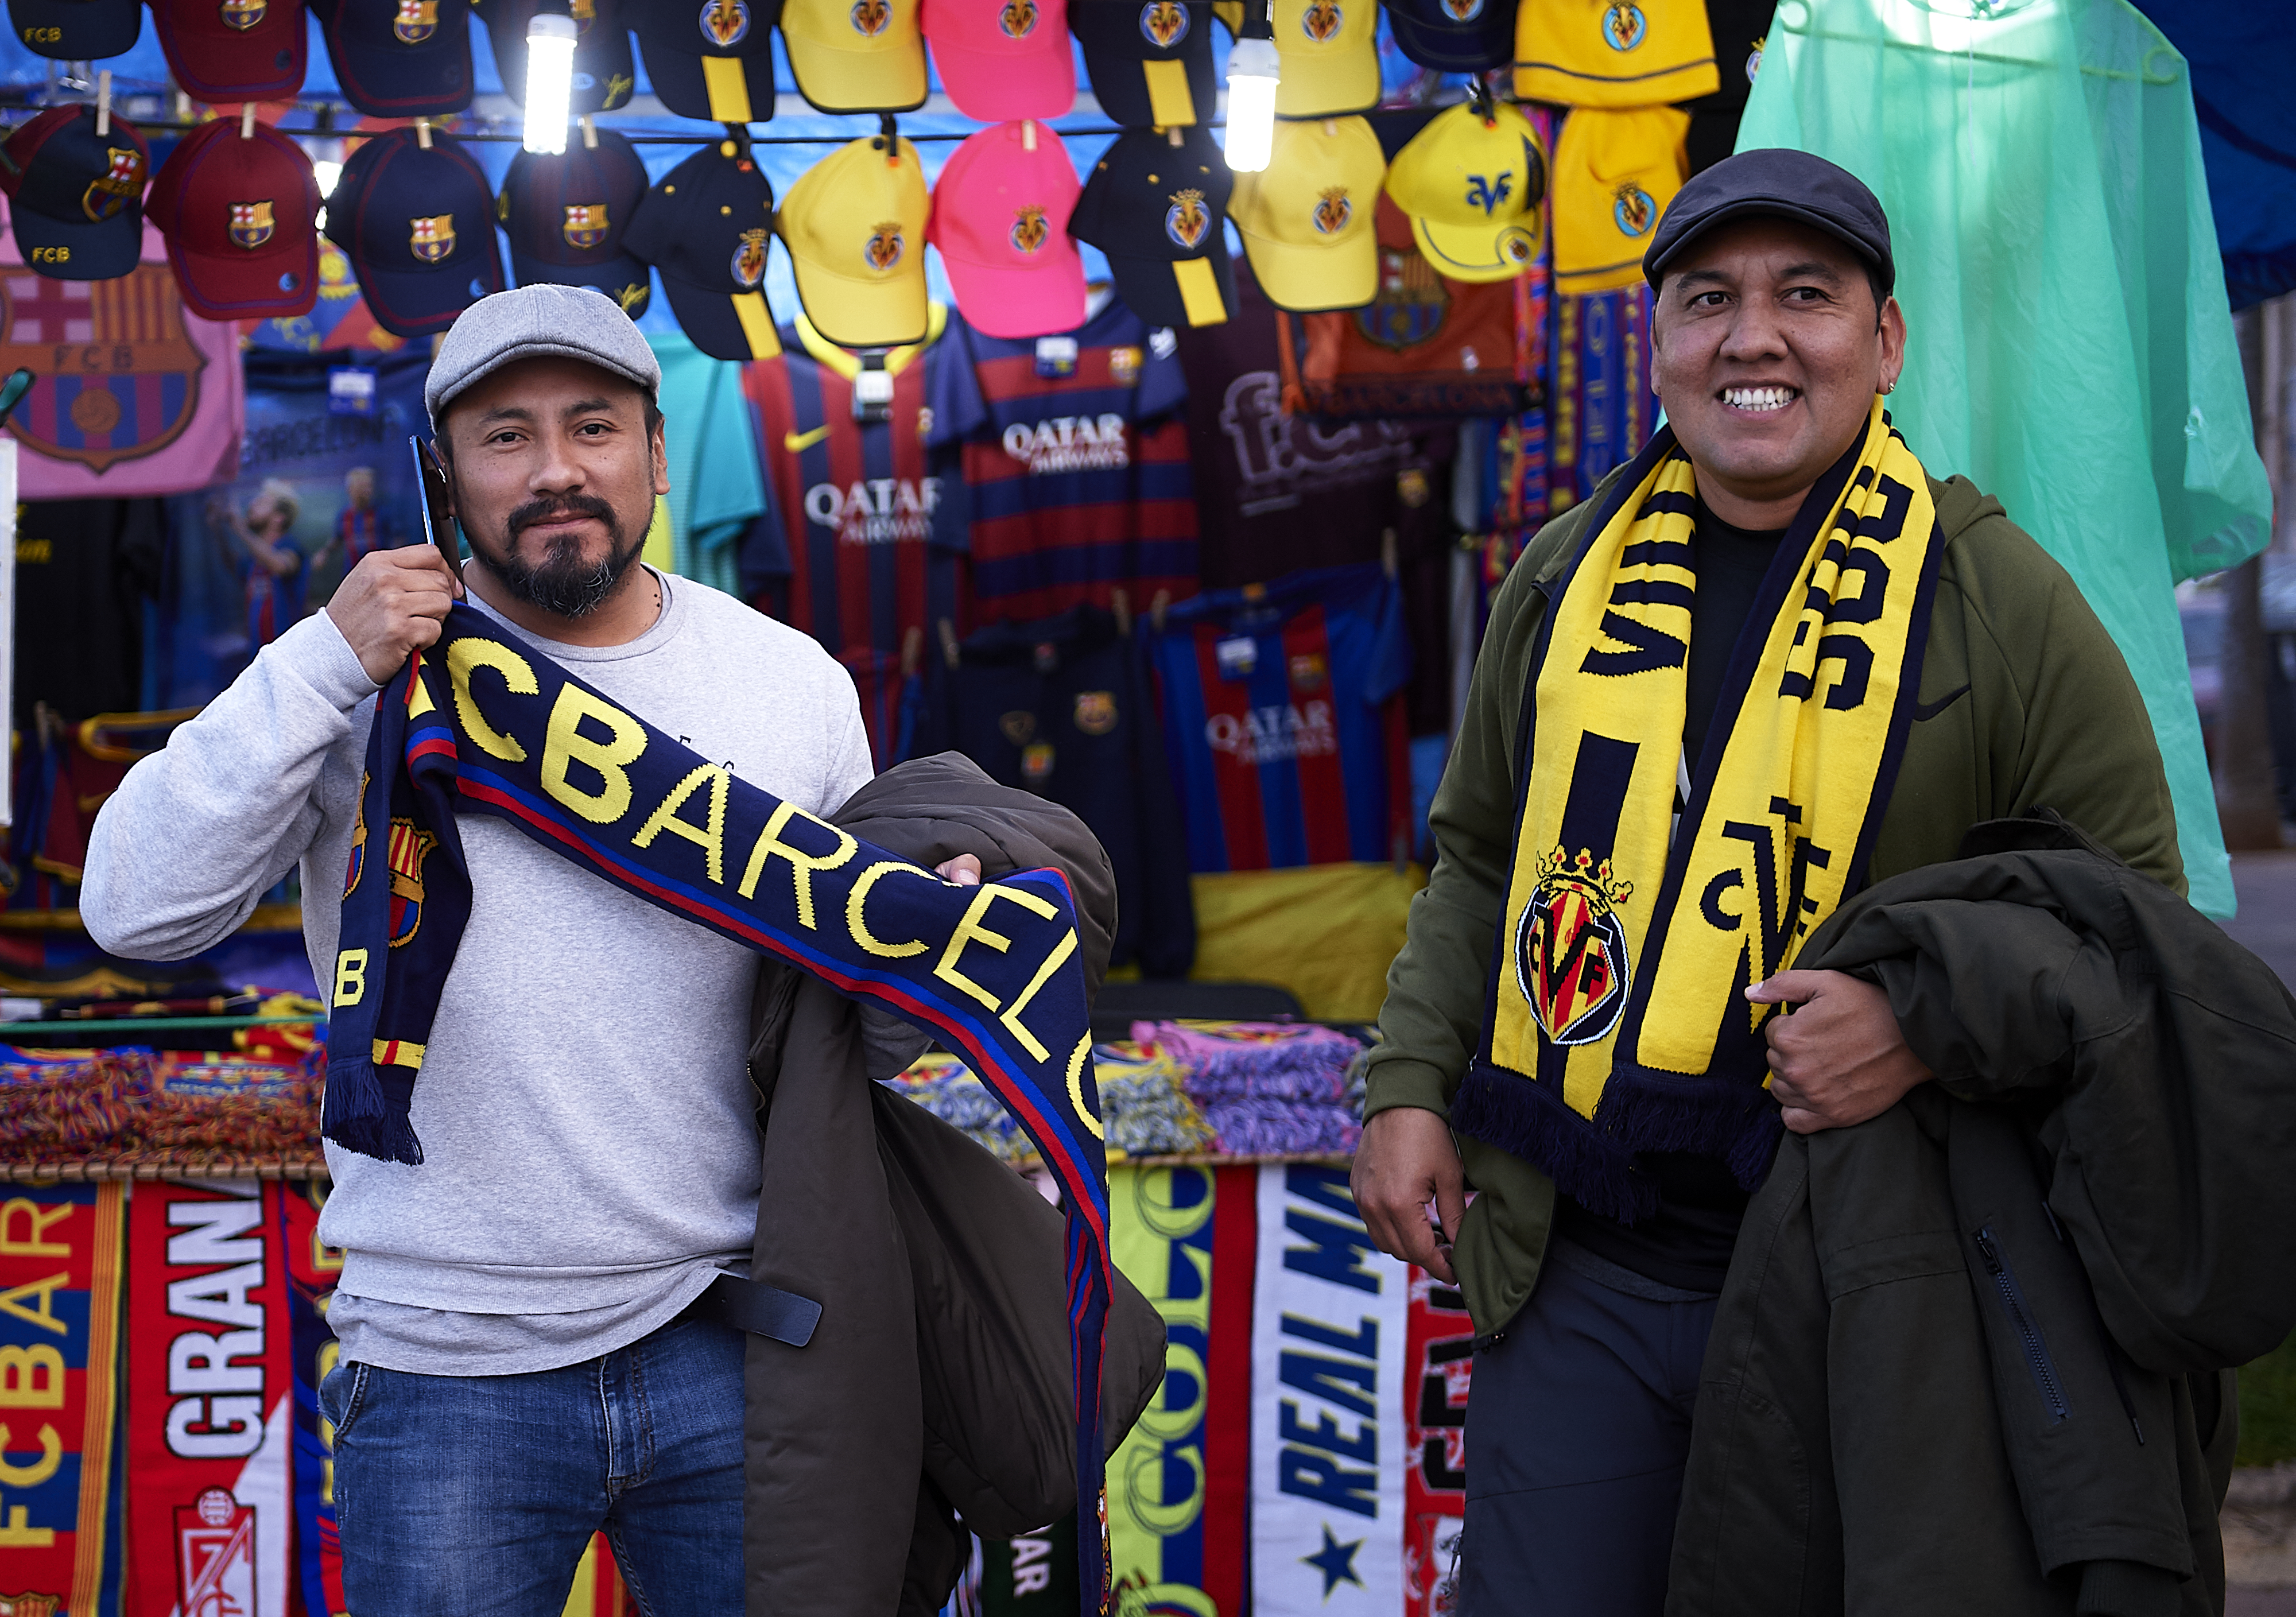 VILLAREAL, SPAIN - APRIL 02: Fans arrives at the stadium prior to the the La Liga match between Villarreal CF and FC Barcelona at Estadio de la Ceramica on April 02, 2019 in Villareal, Spain. (Photo by Manuel Queimadelos Alonso/Getty Images)